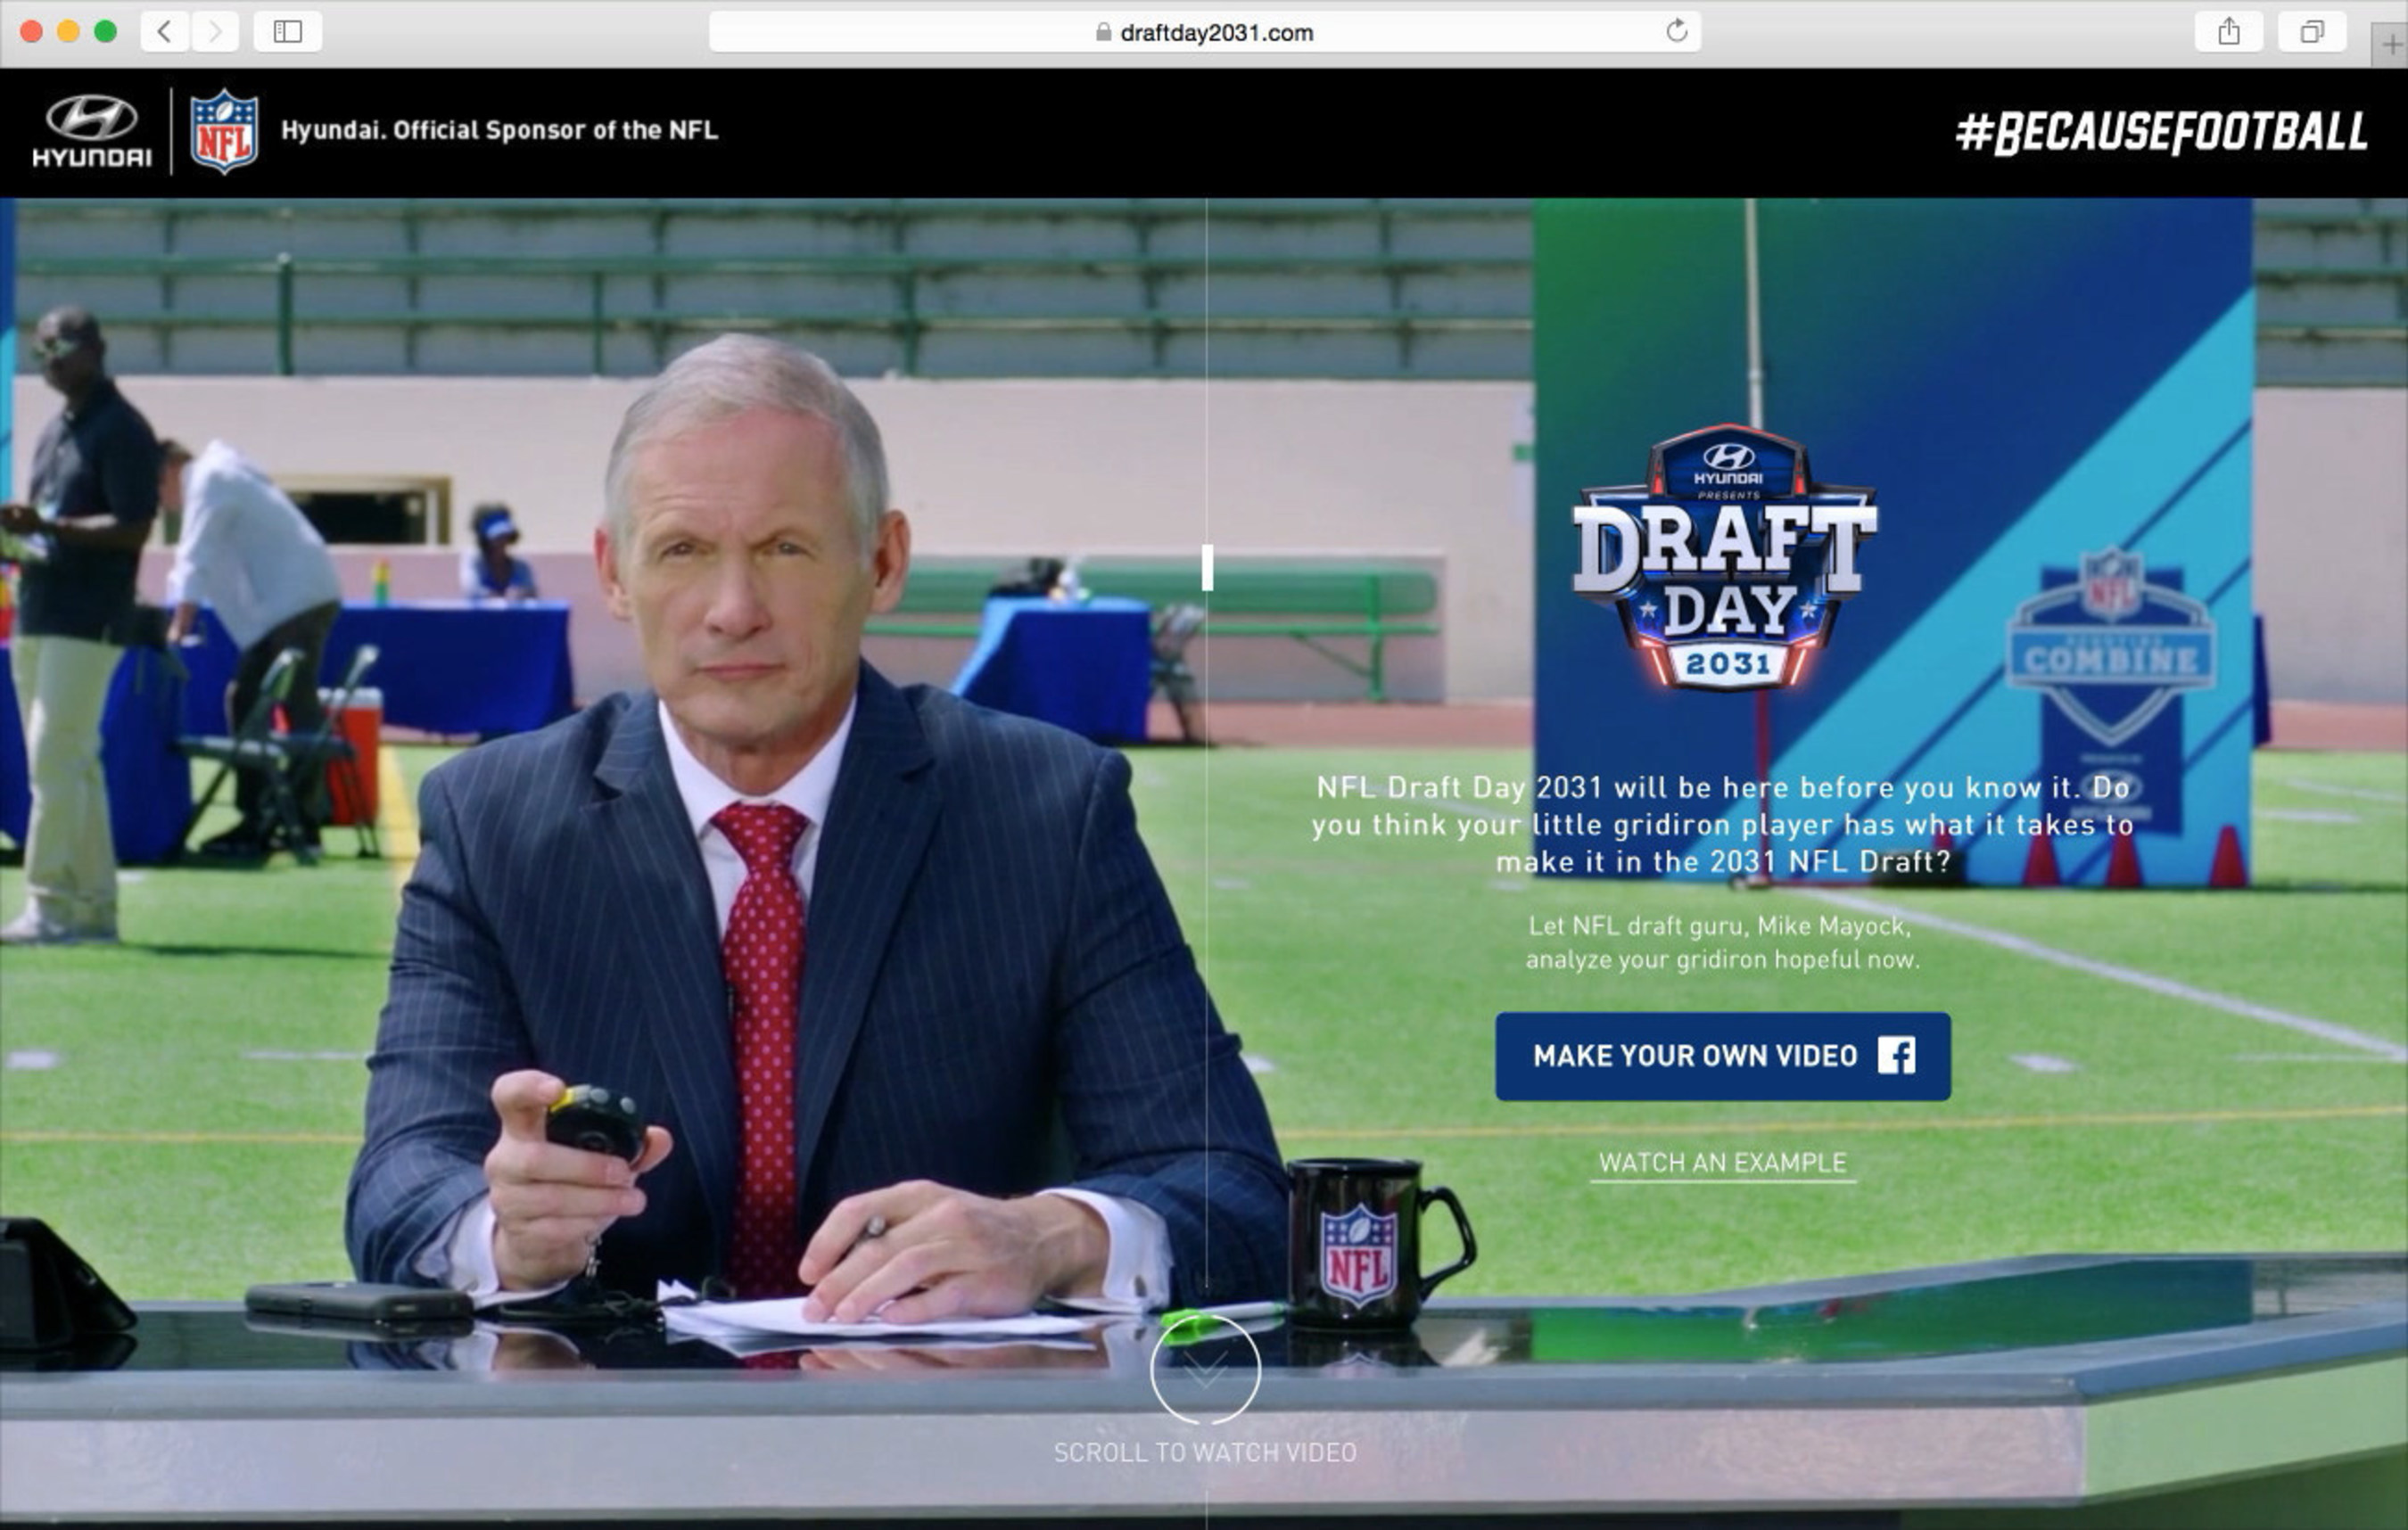 Hyundai is helping make the 2016 NFL Draft experience better for fans by allowing families to create and share their own draft videos of their kids at DraftDay2031.com.